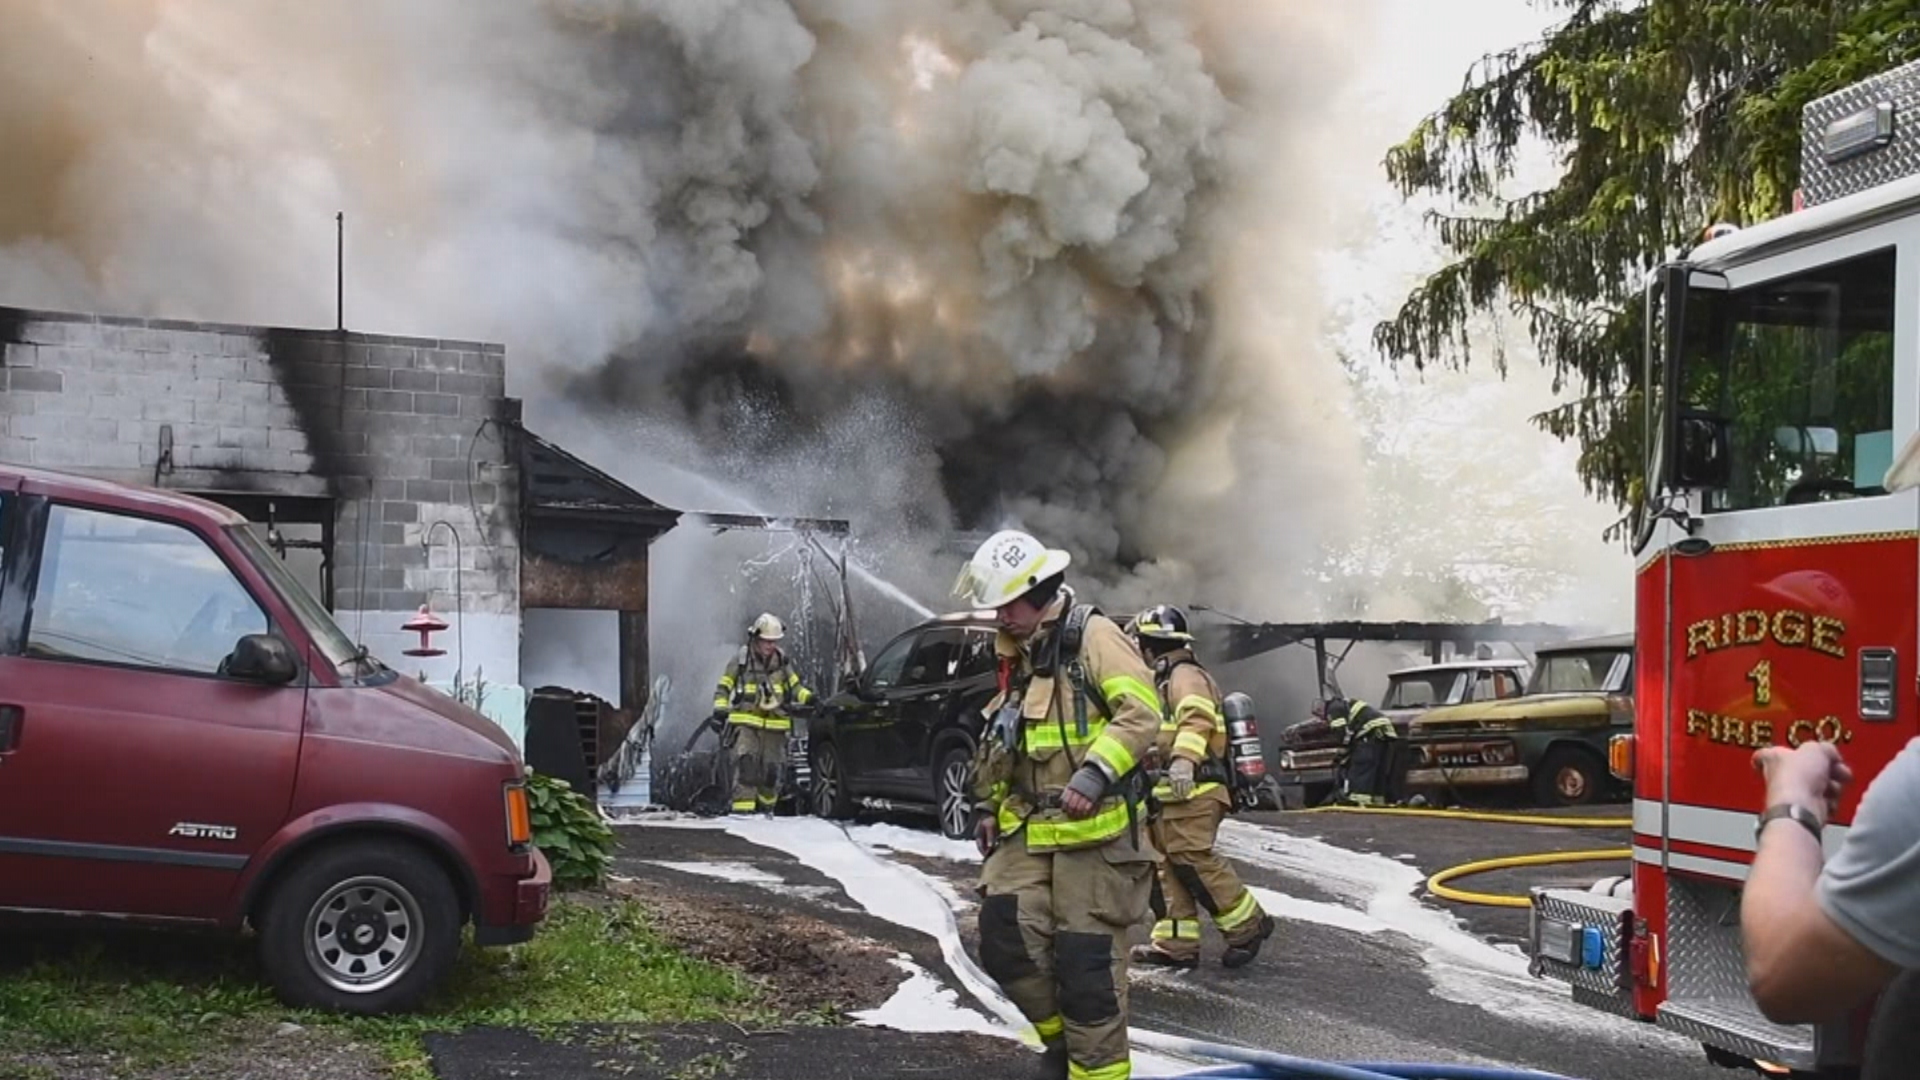 Minor among 3 people sent to hospital due to fire in East Coventry Township, Chester County